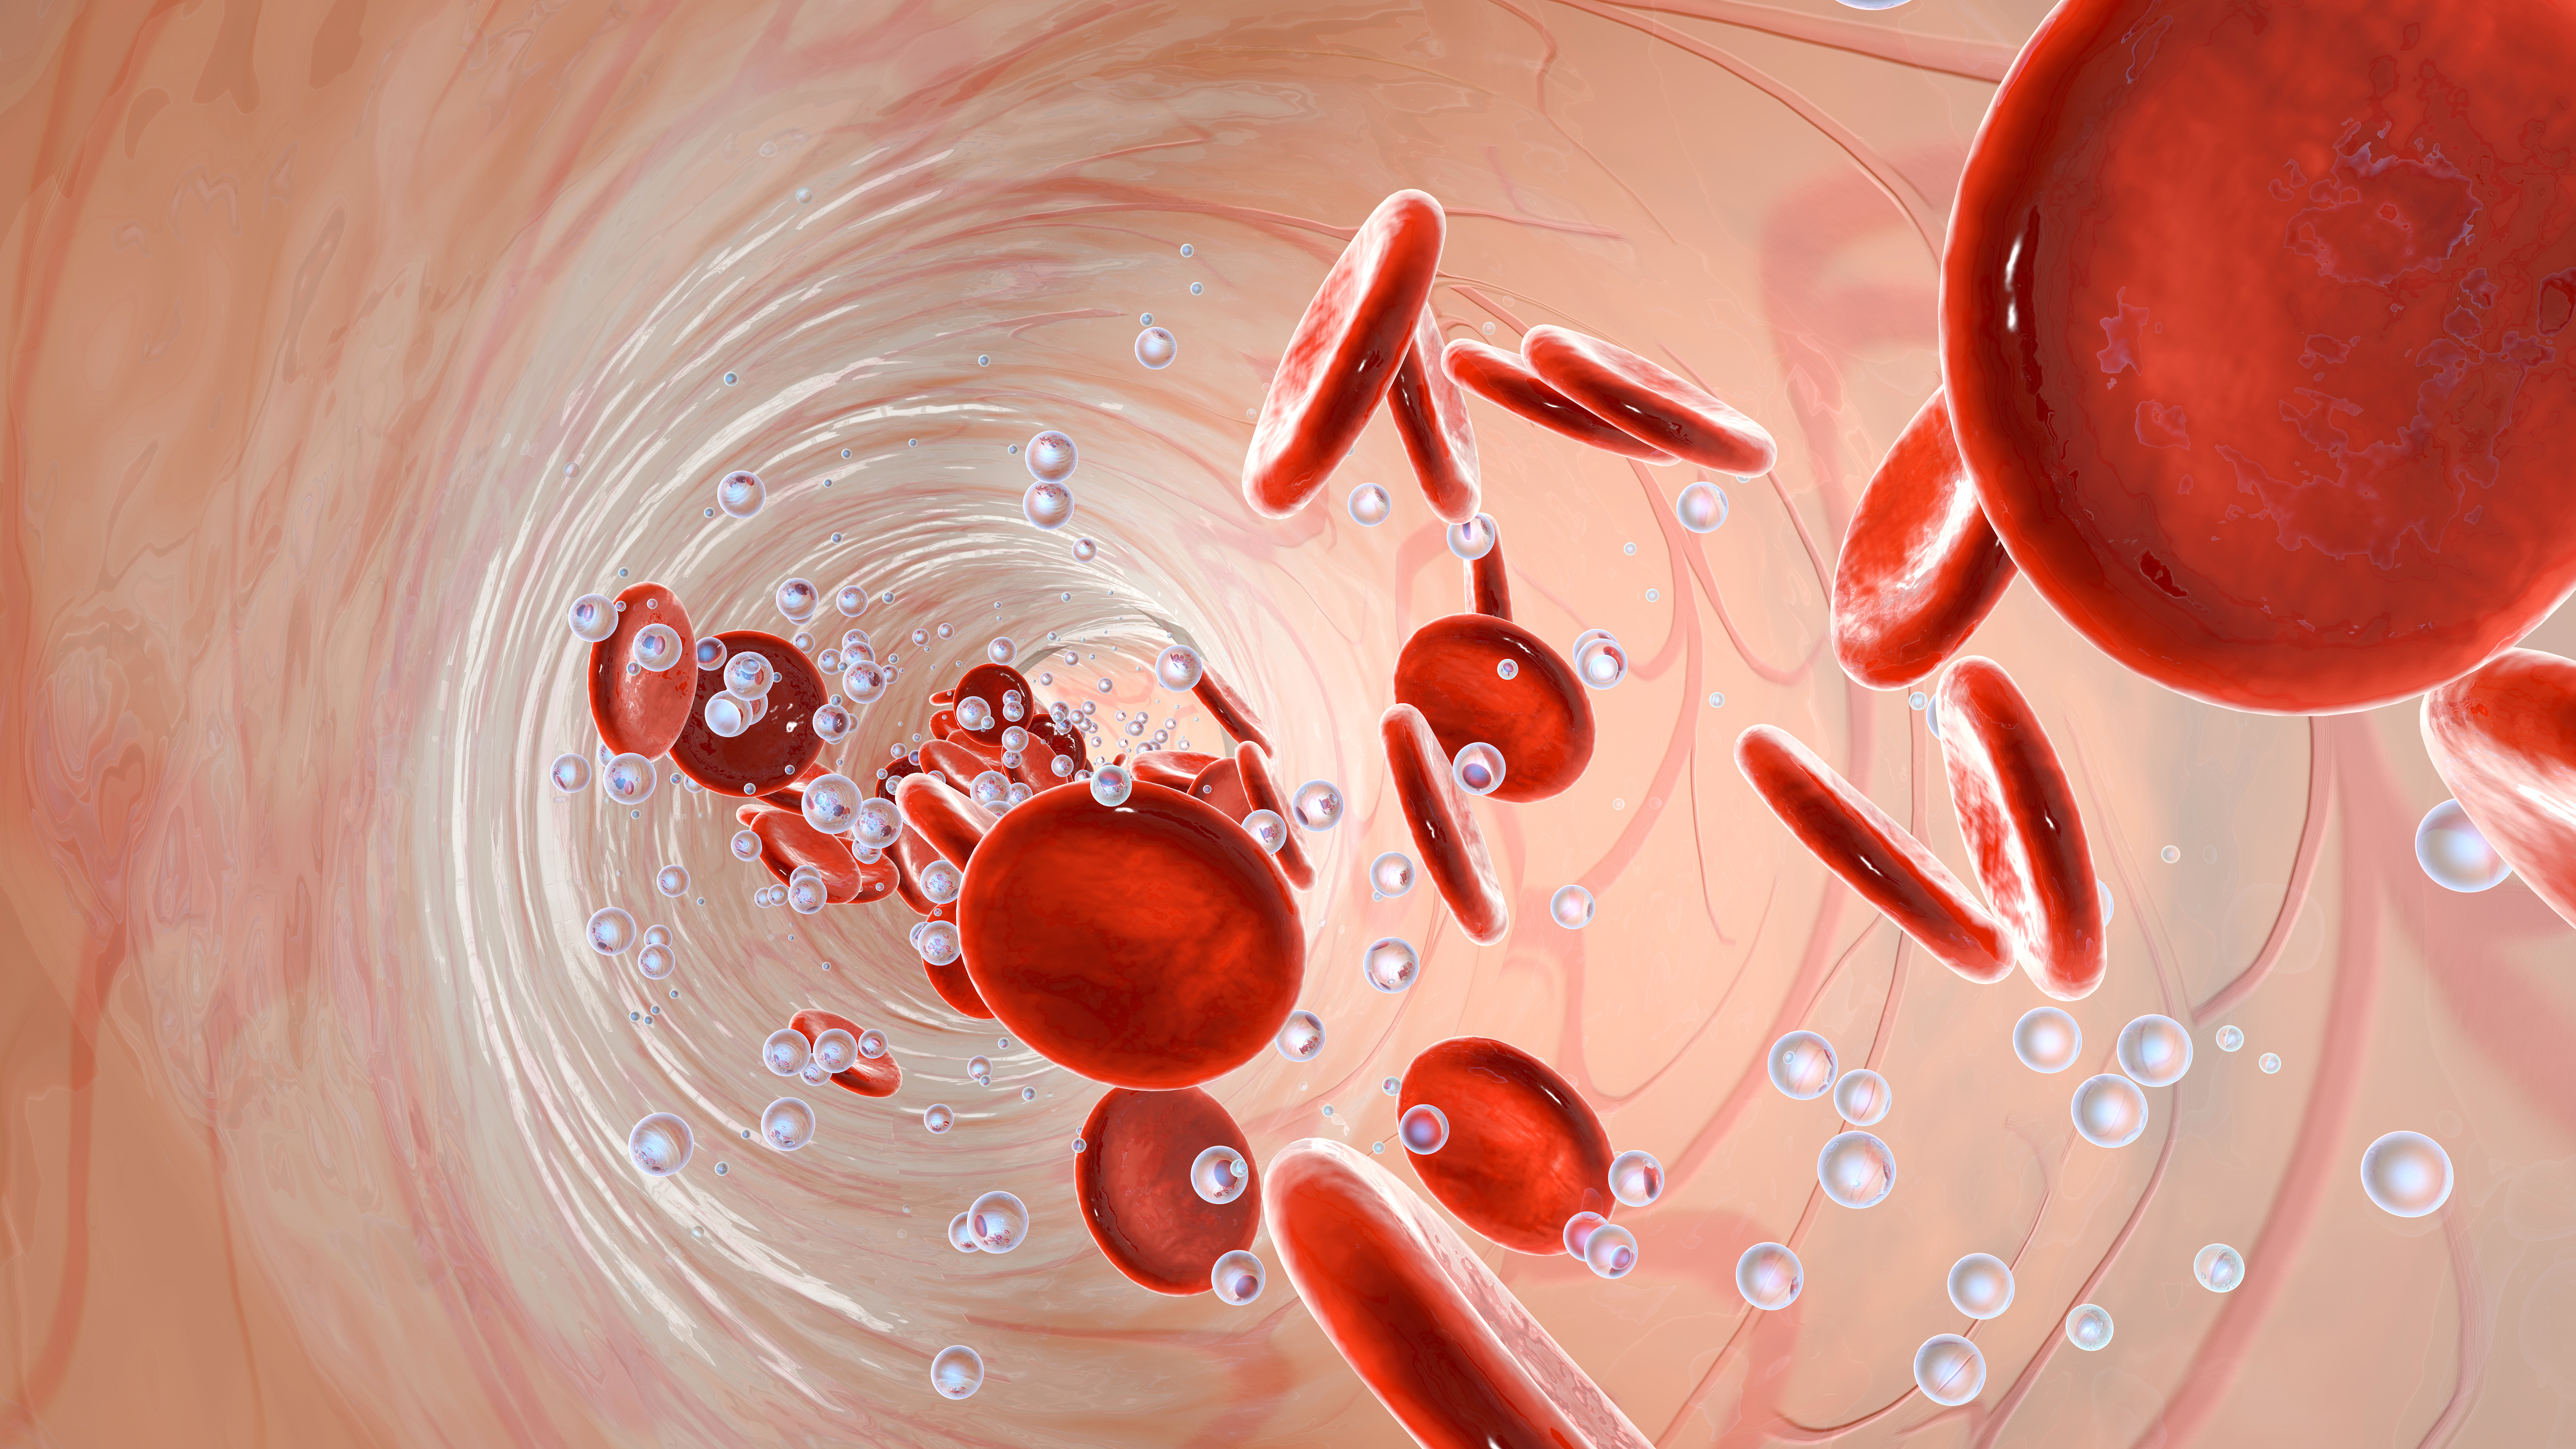 Oxygen molecules and erythrocytes floating in a vessel in the blood stream.